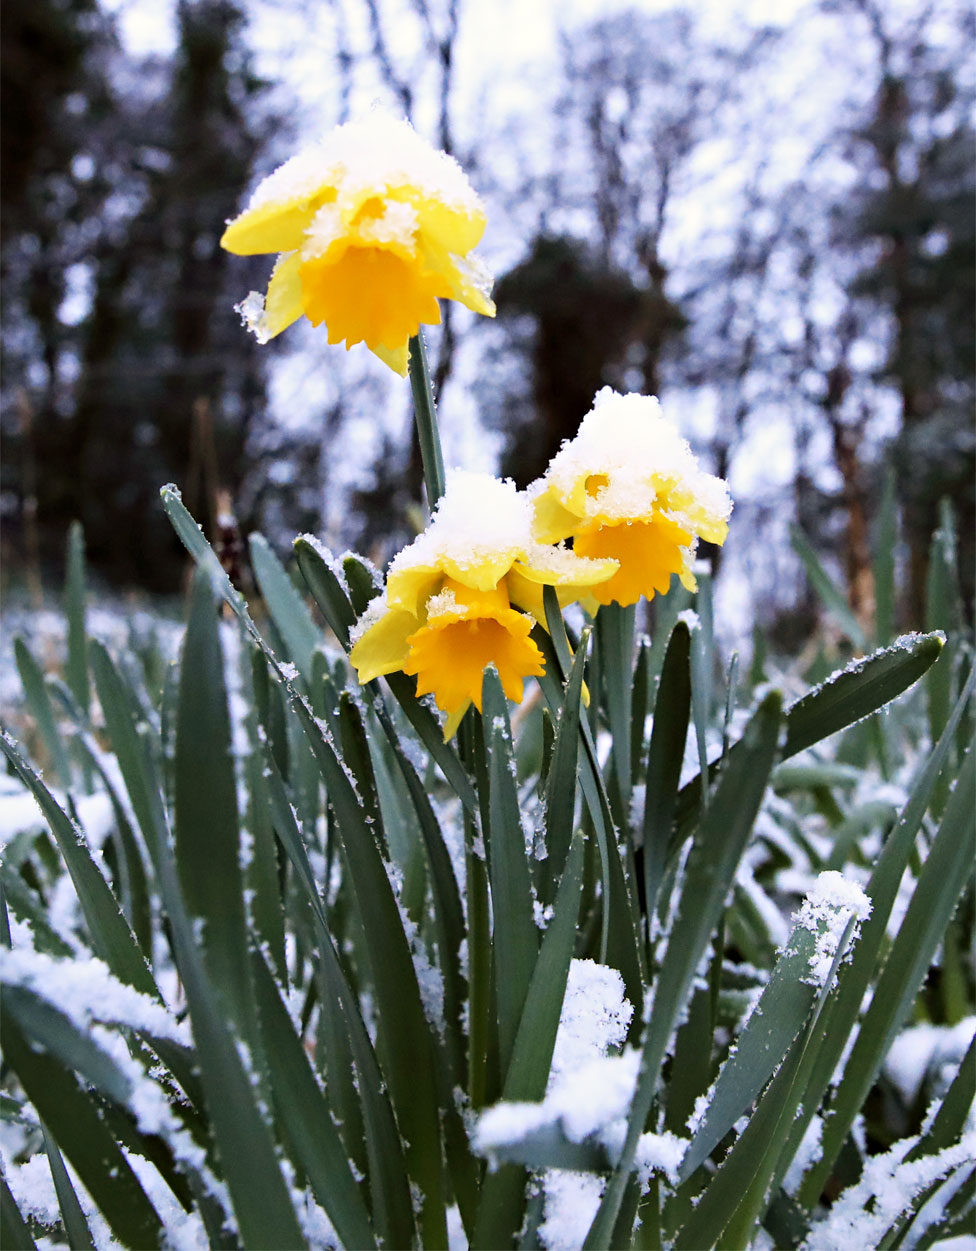 Snow covered daffodils in Liverpool.